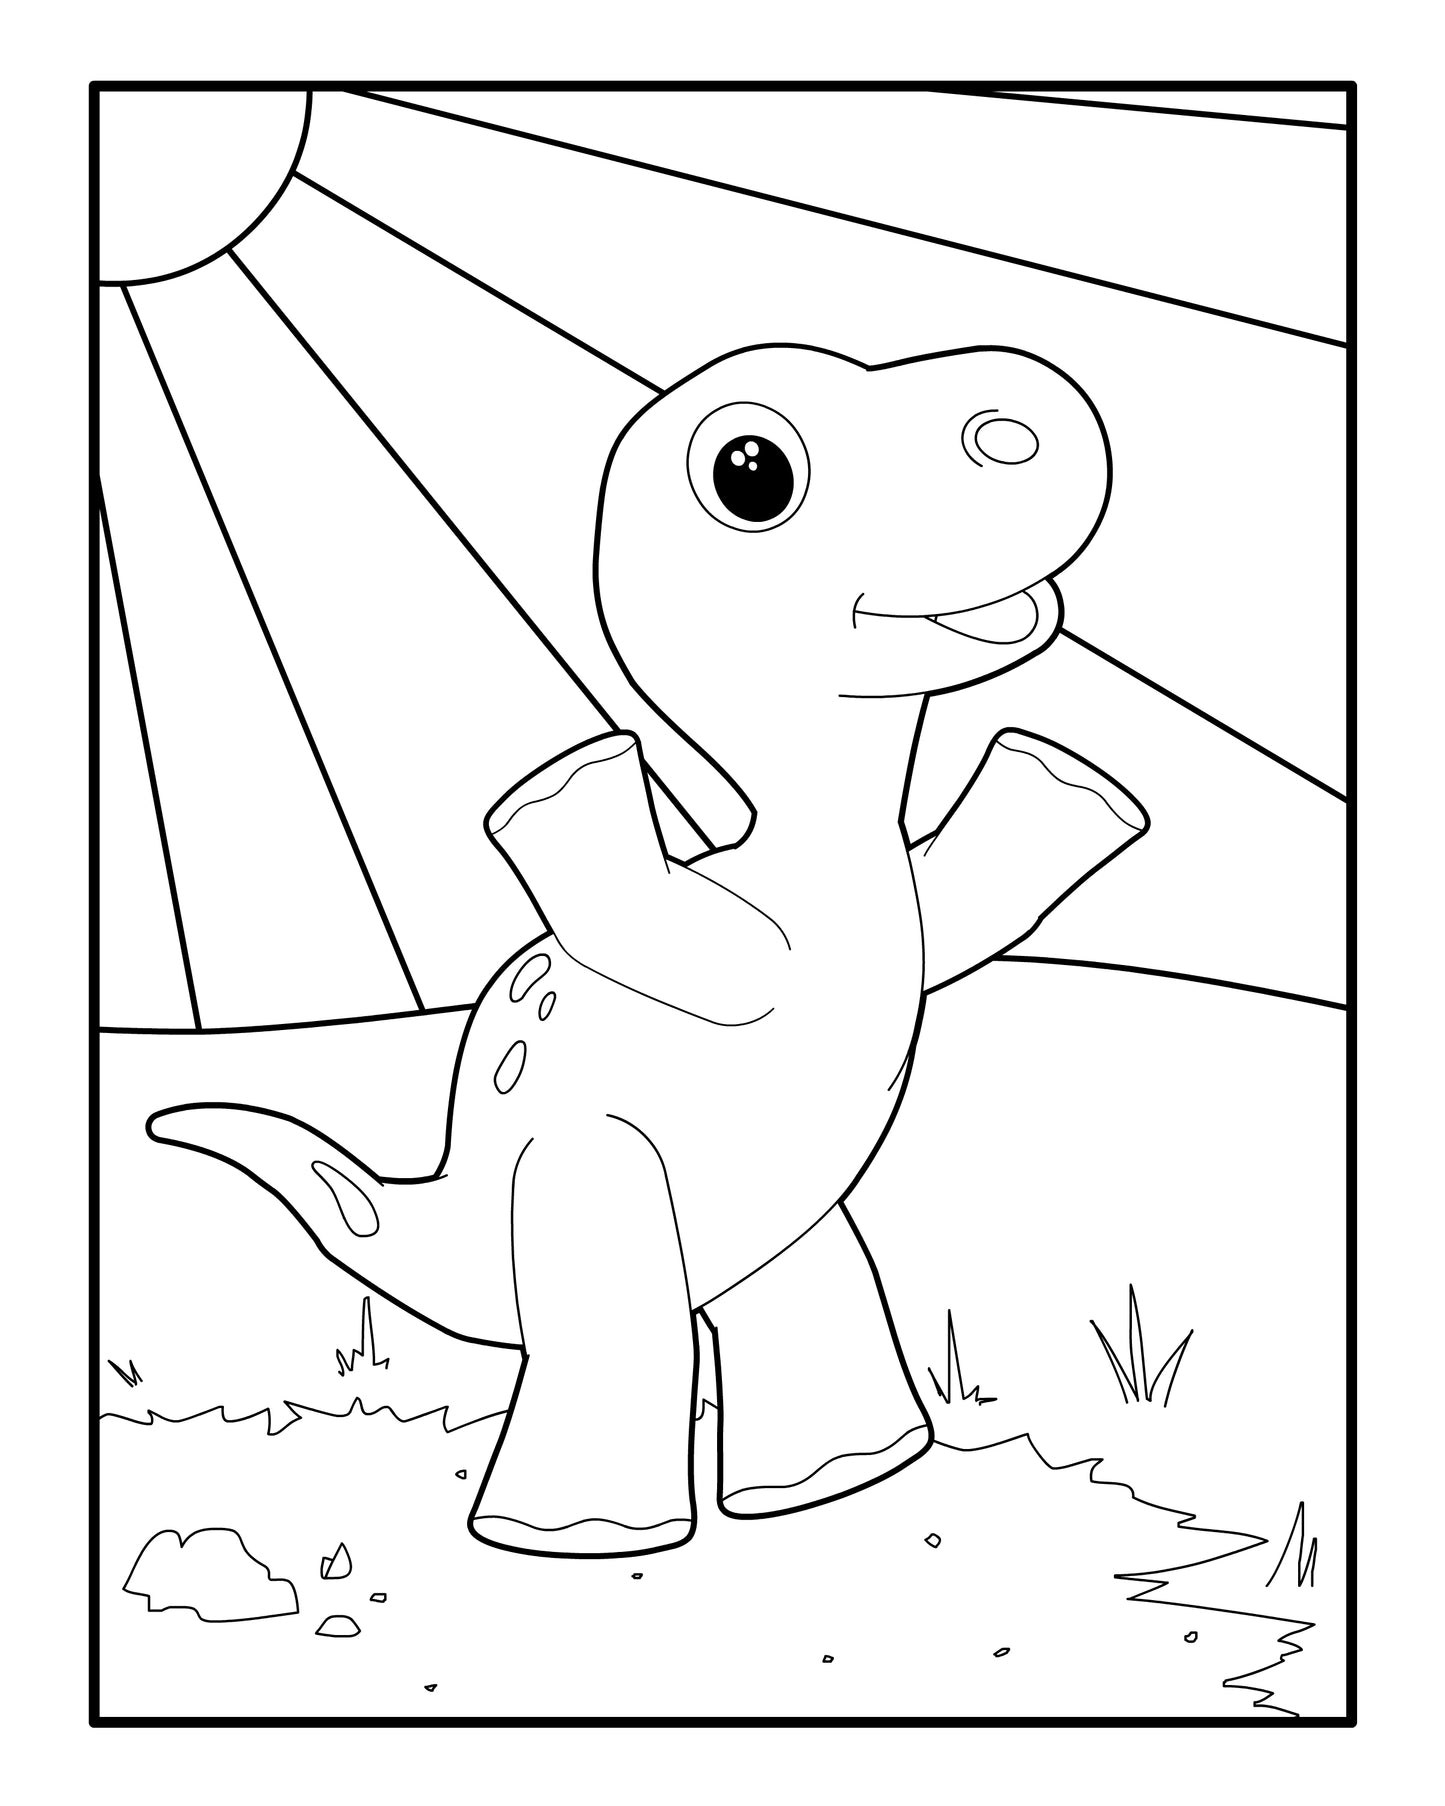 Darren The Dirty Dino - A Storytime Coloring Book